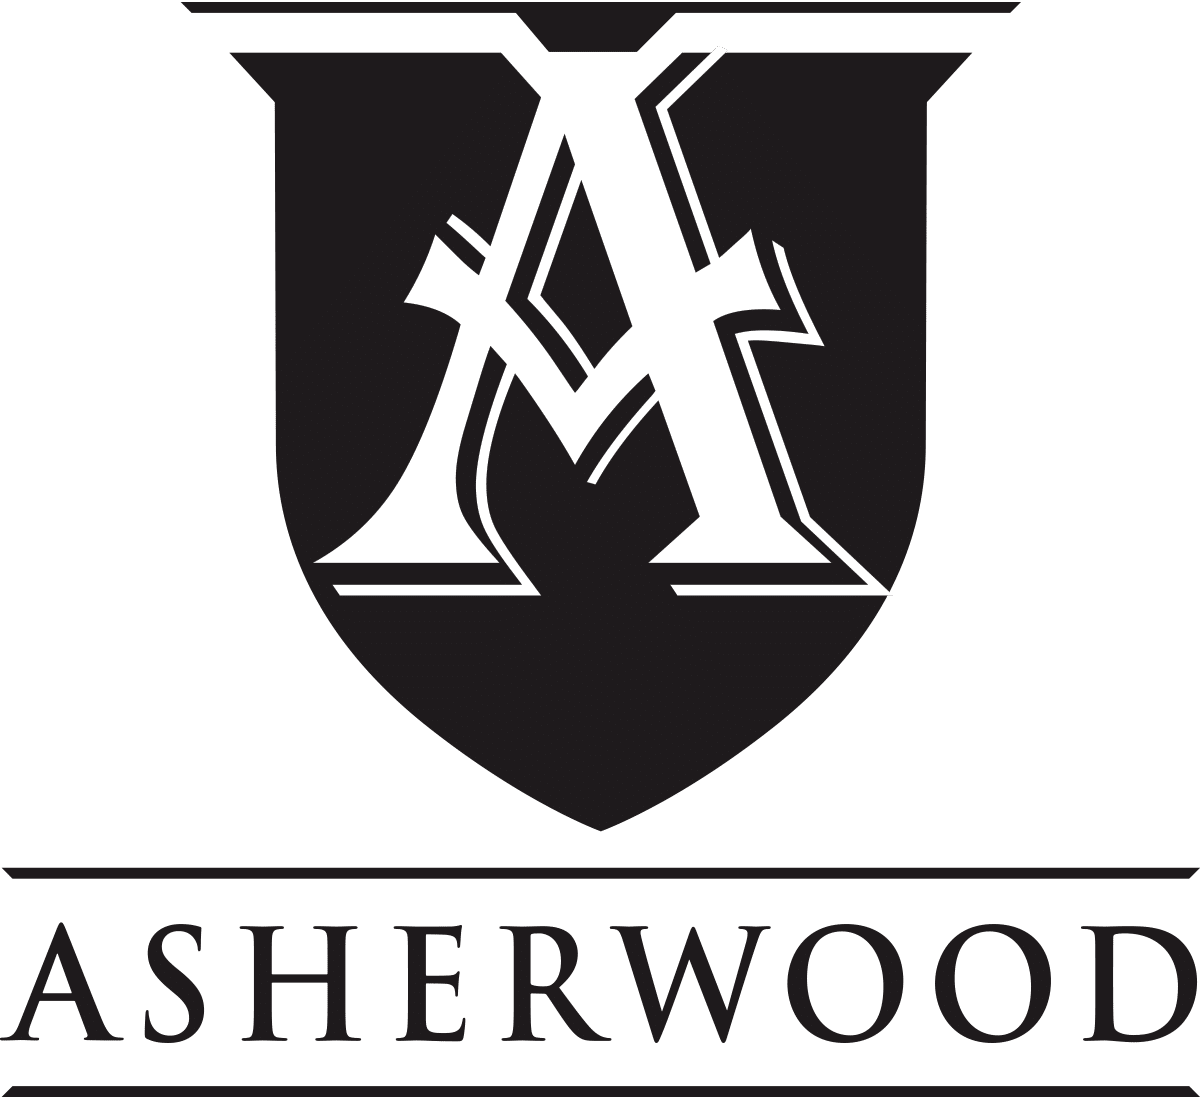 The luxury logo for Asherwood Estates, created exclusively by the expert custom home builders.